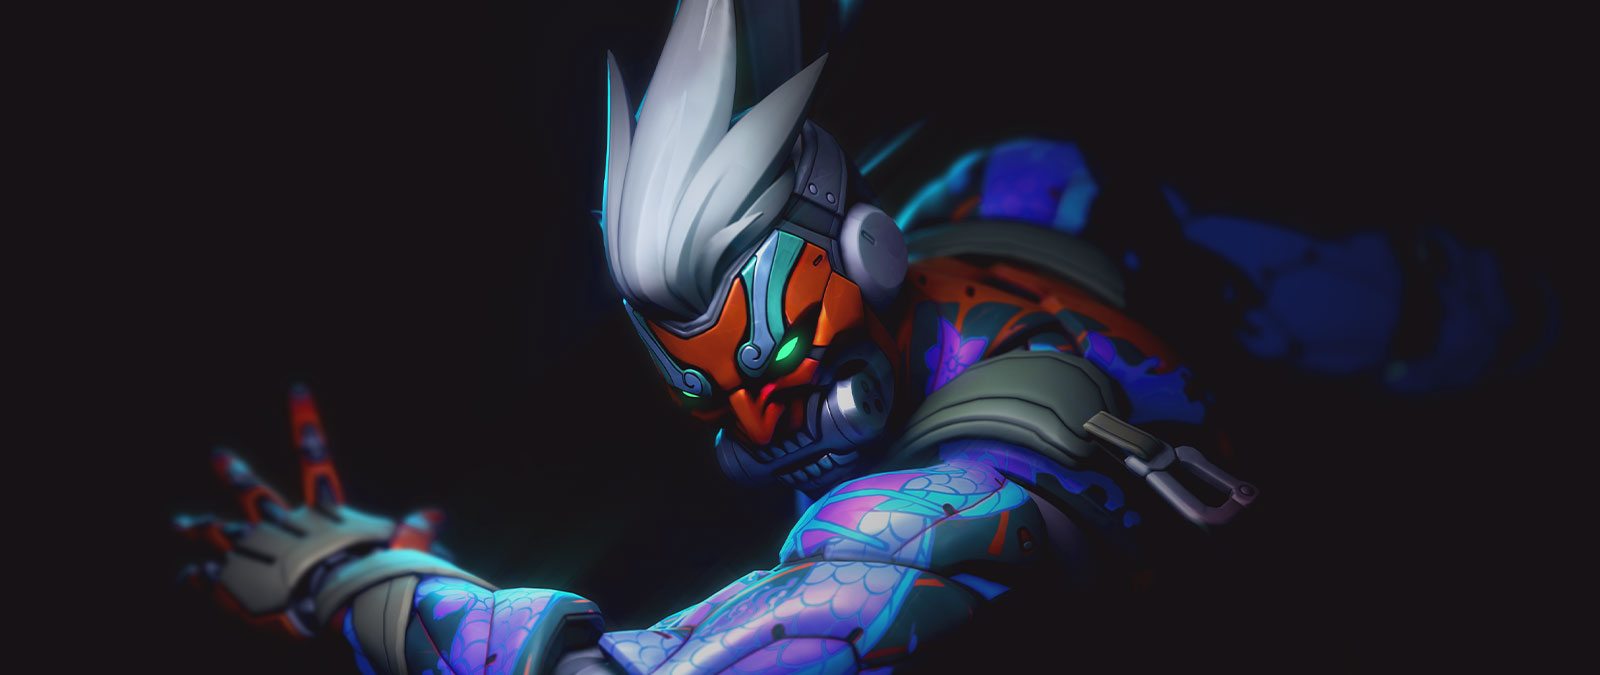 Genji emerges from the shadows.